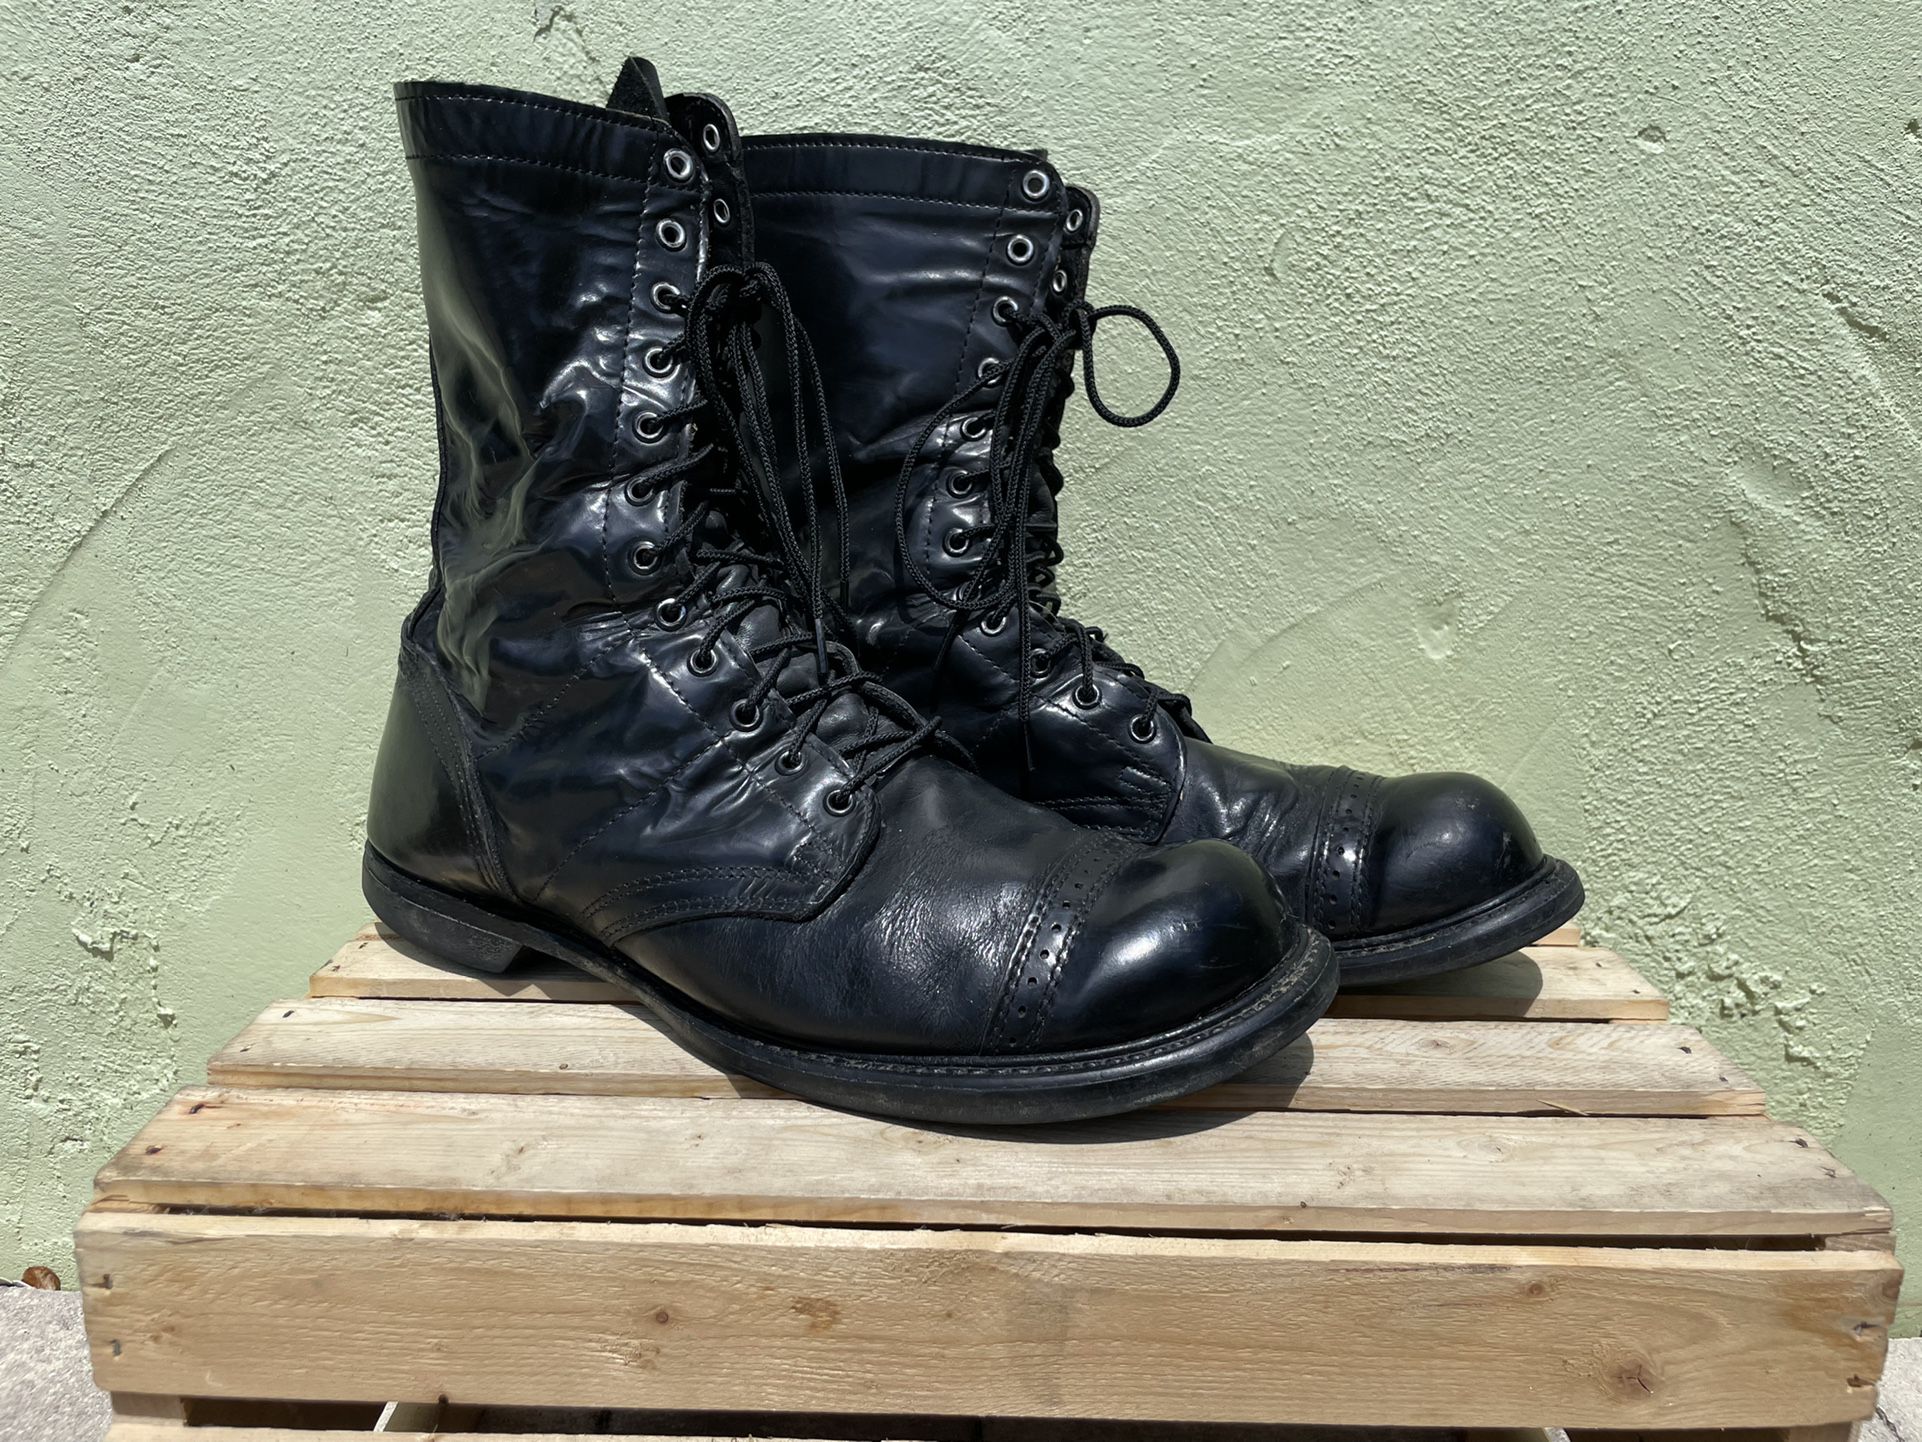 USA Military Vintage H&H Paratrooper Jump Boots Size 13 Made in the USA